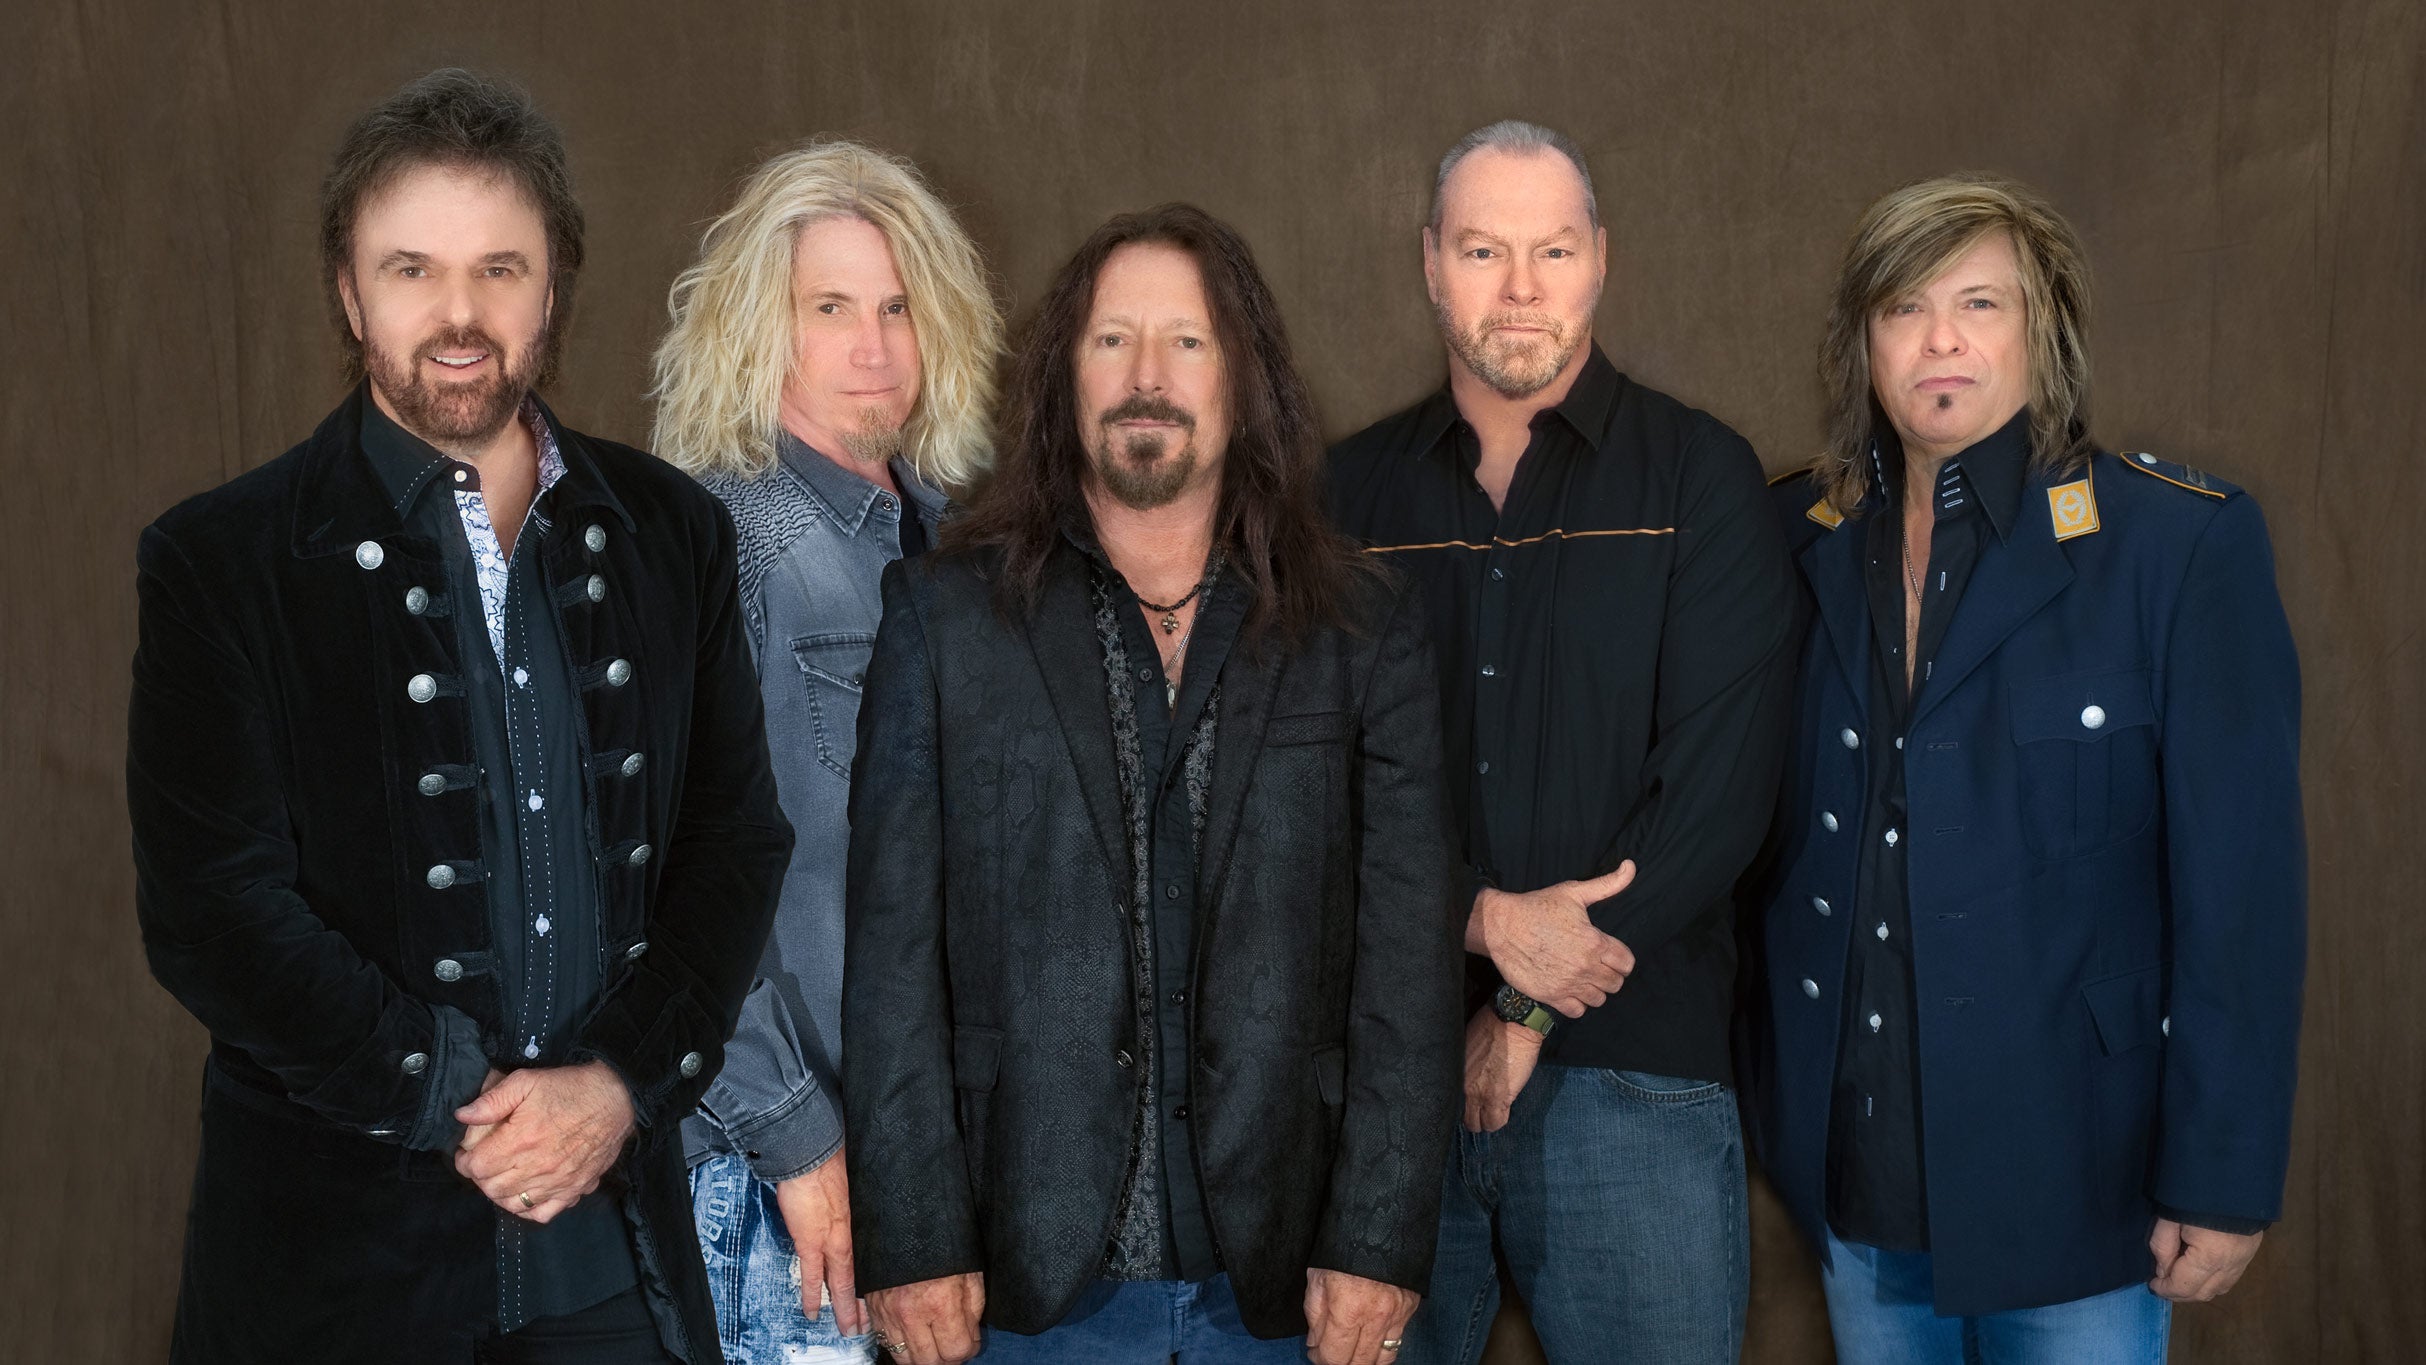 38 Special at River City Casino & Hotel